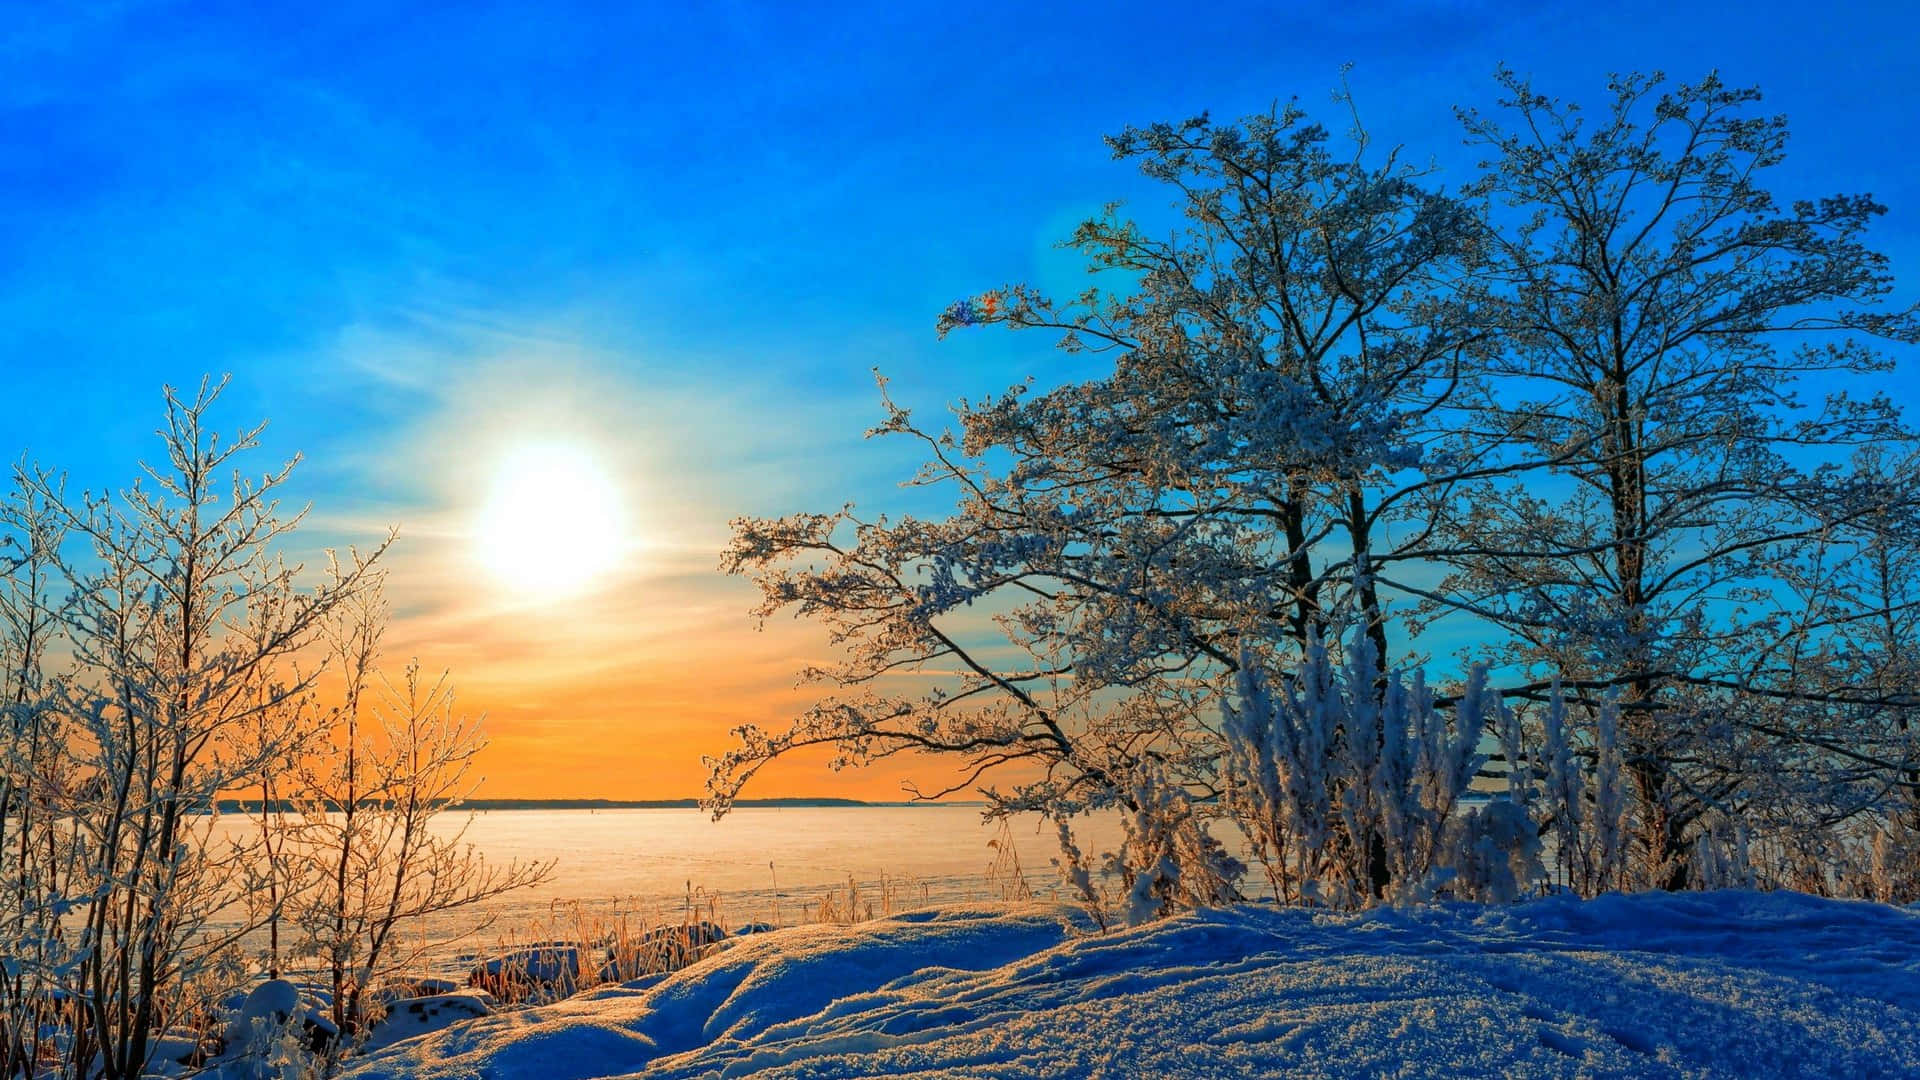 Snowy Forest Sunset Sky Pretty Nature Picture